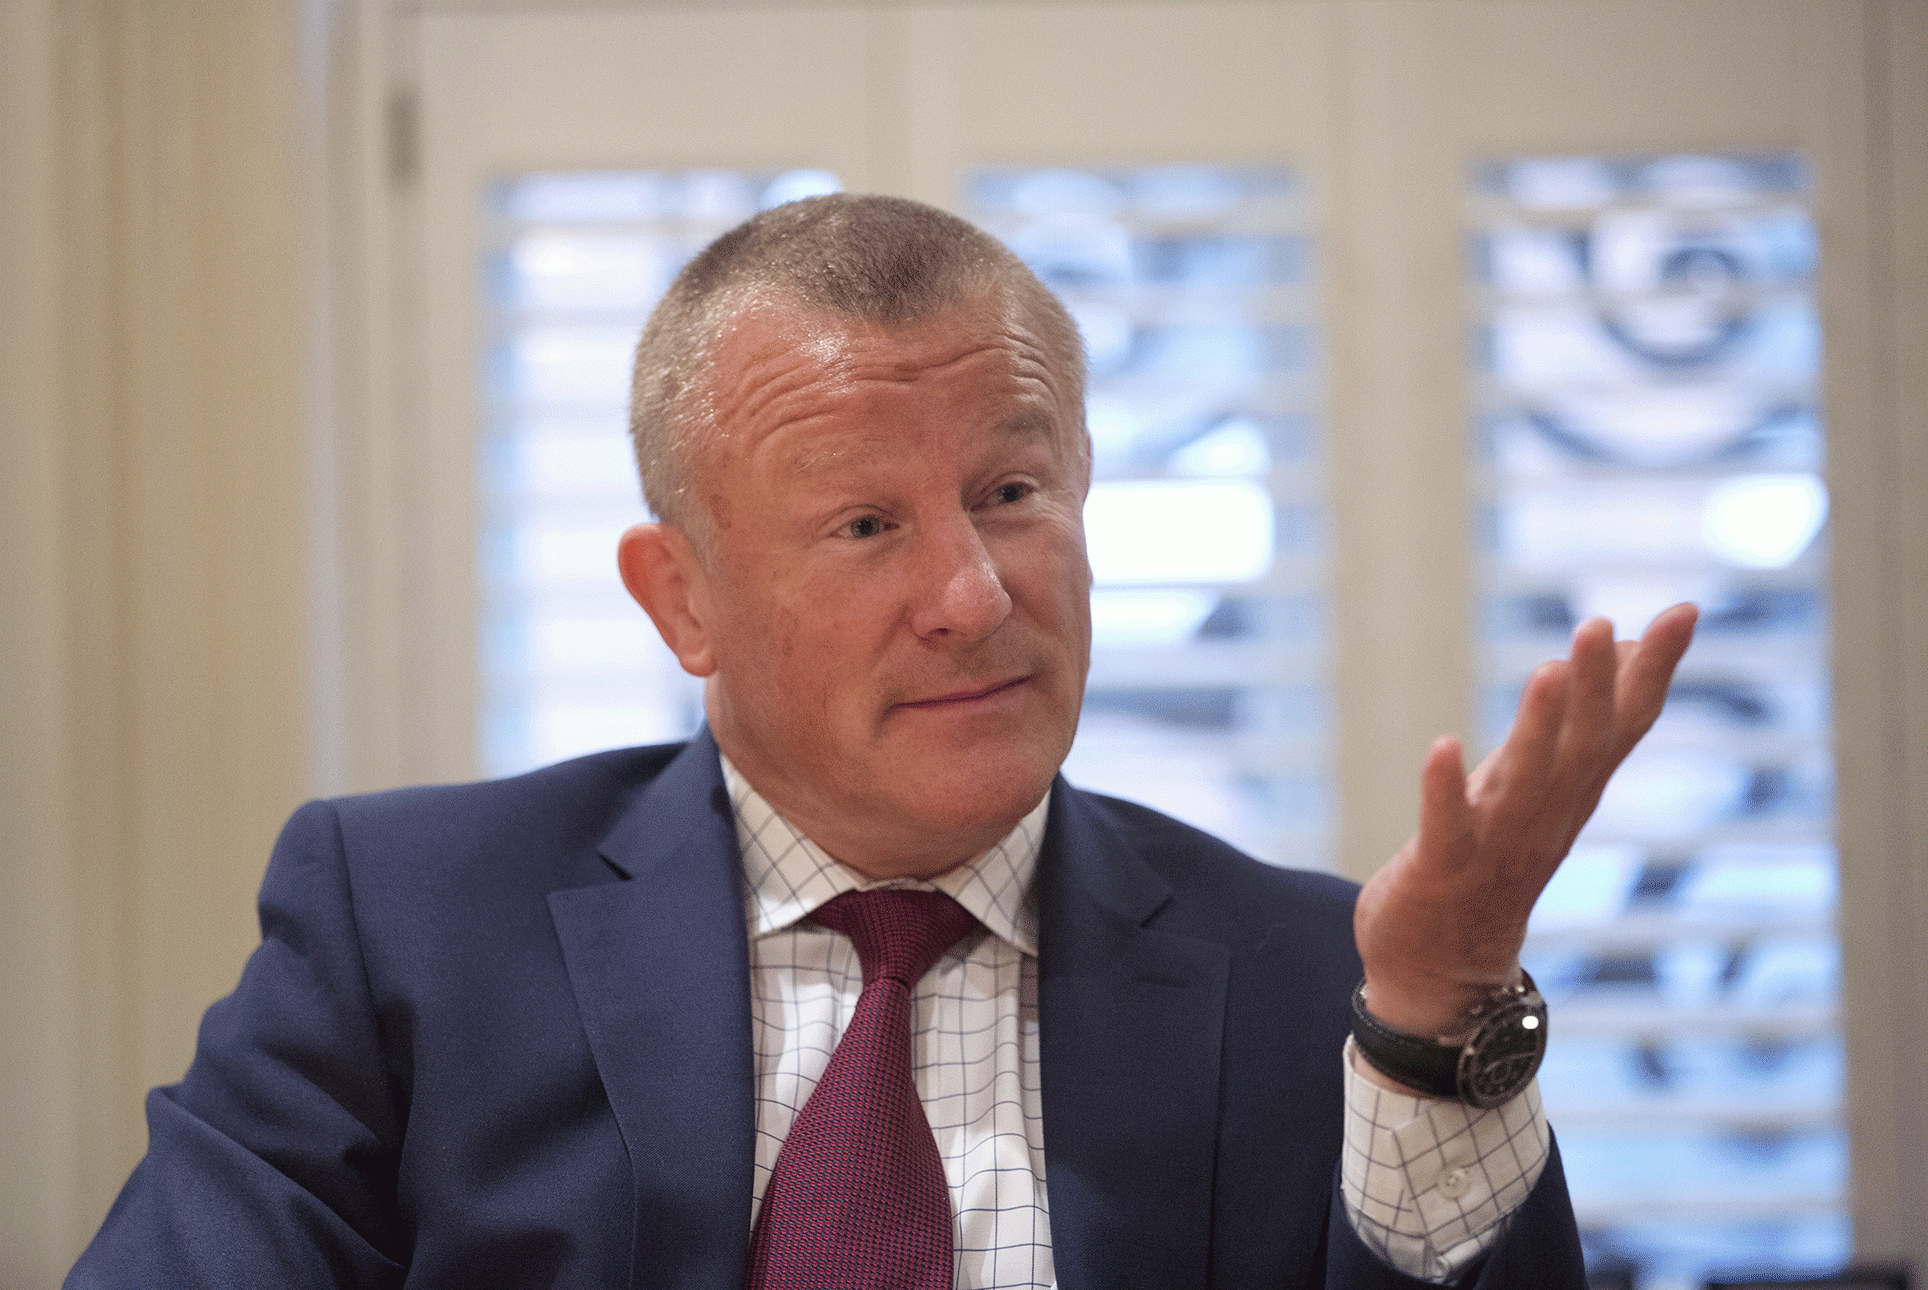 Neil Woodford had previously cancelled all bonuses at his firm